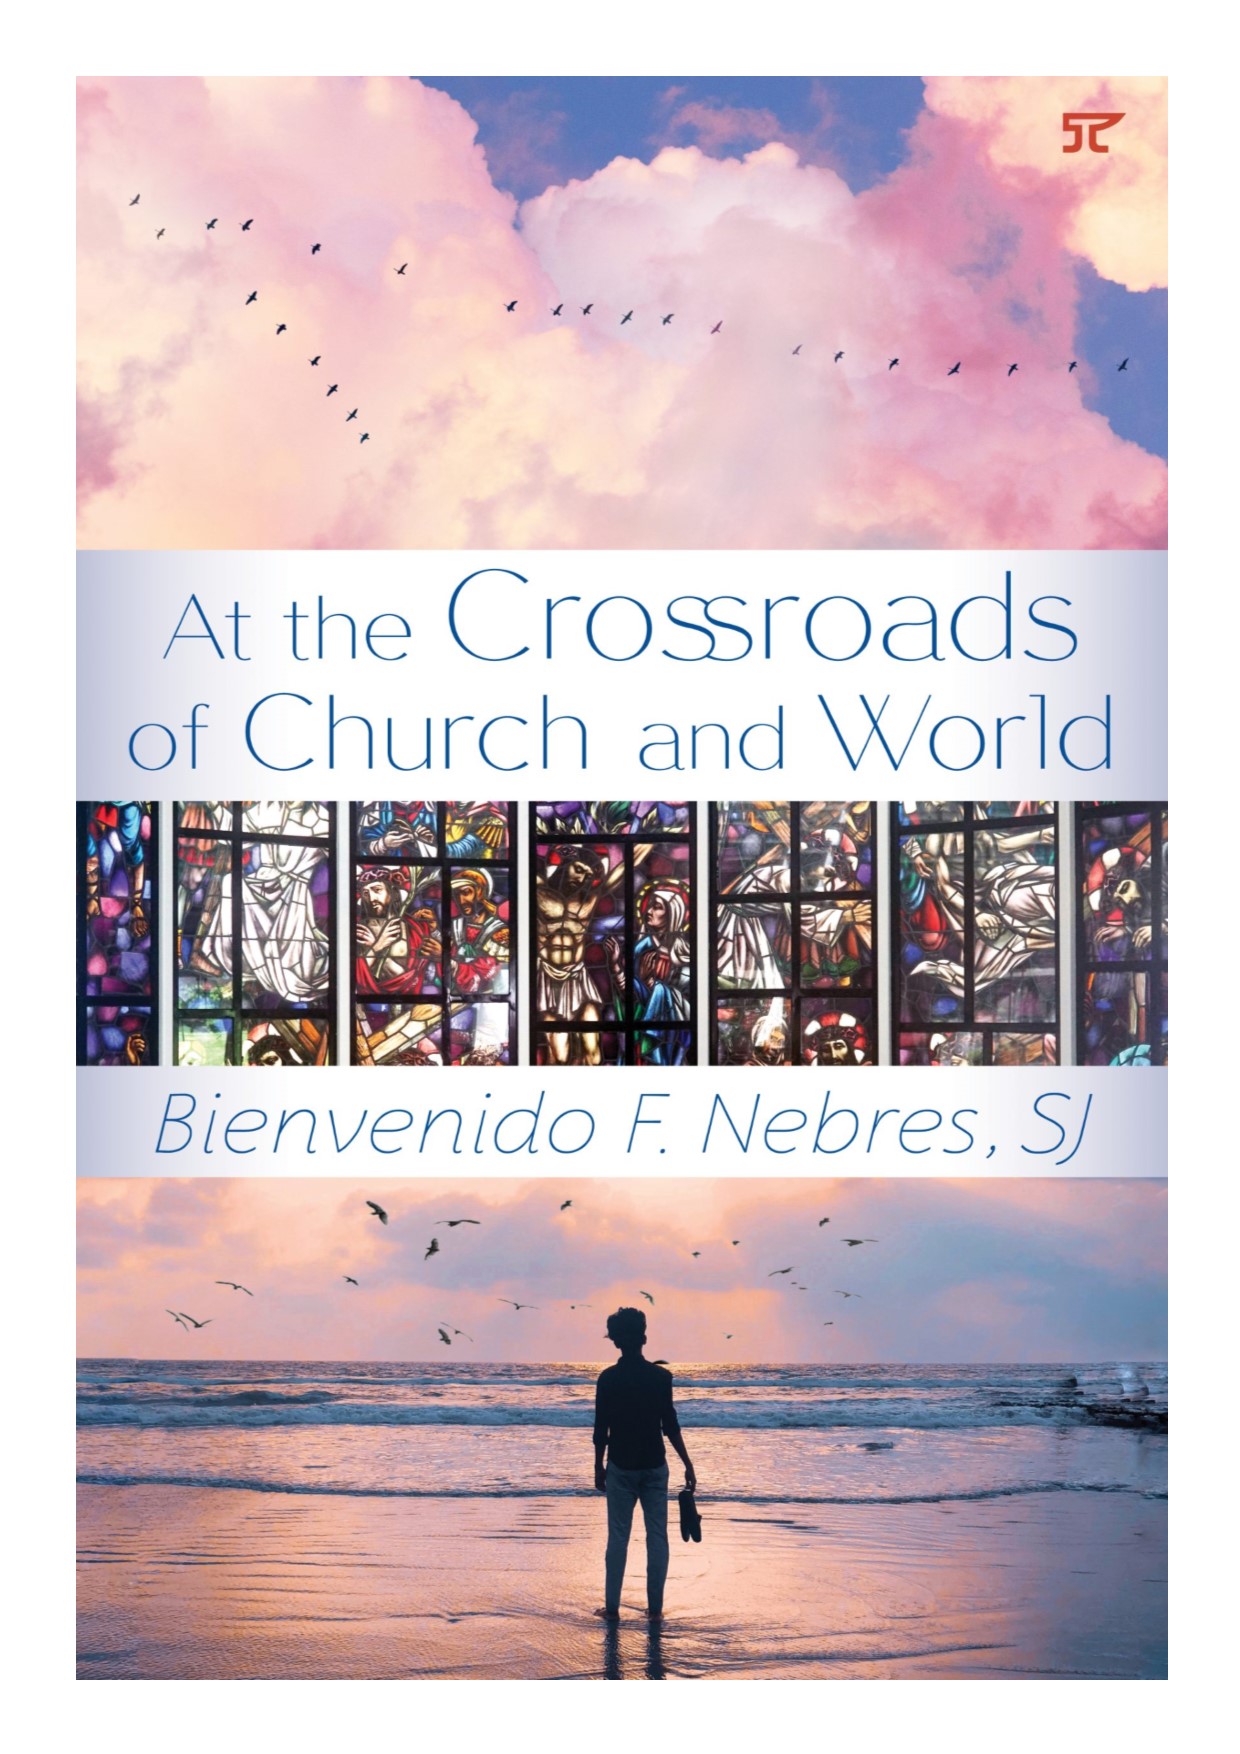 At the crossroads of church and world